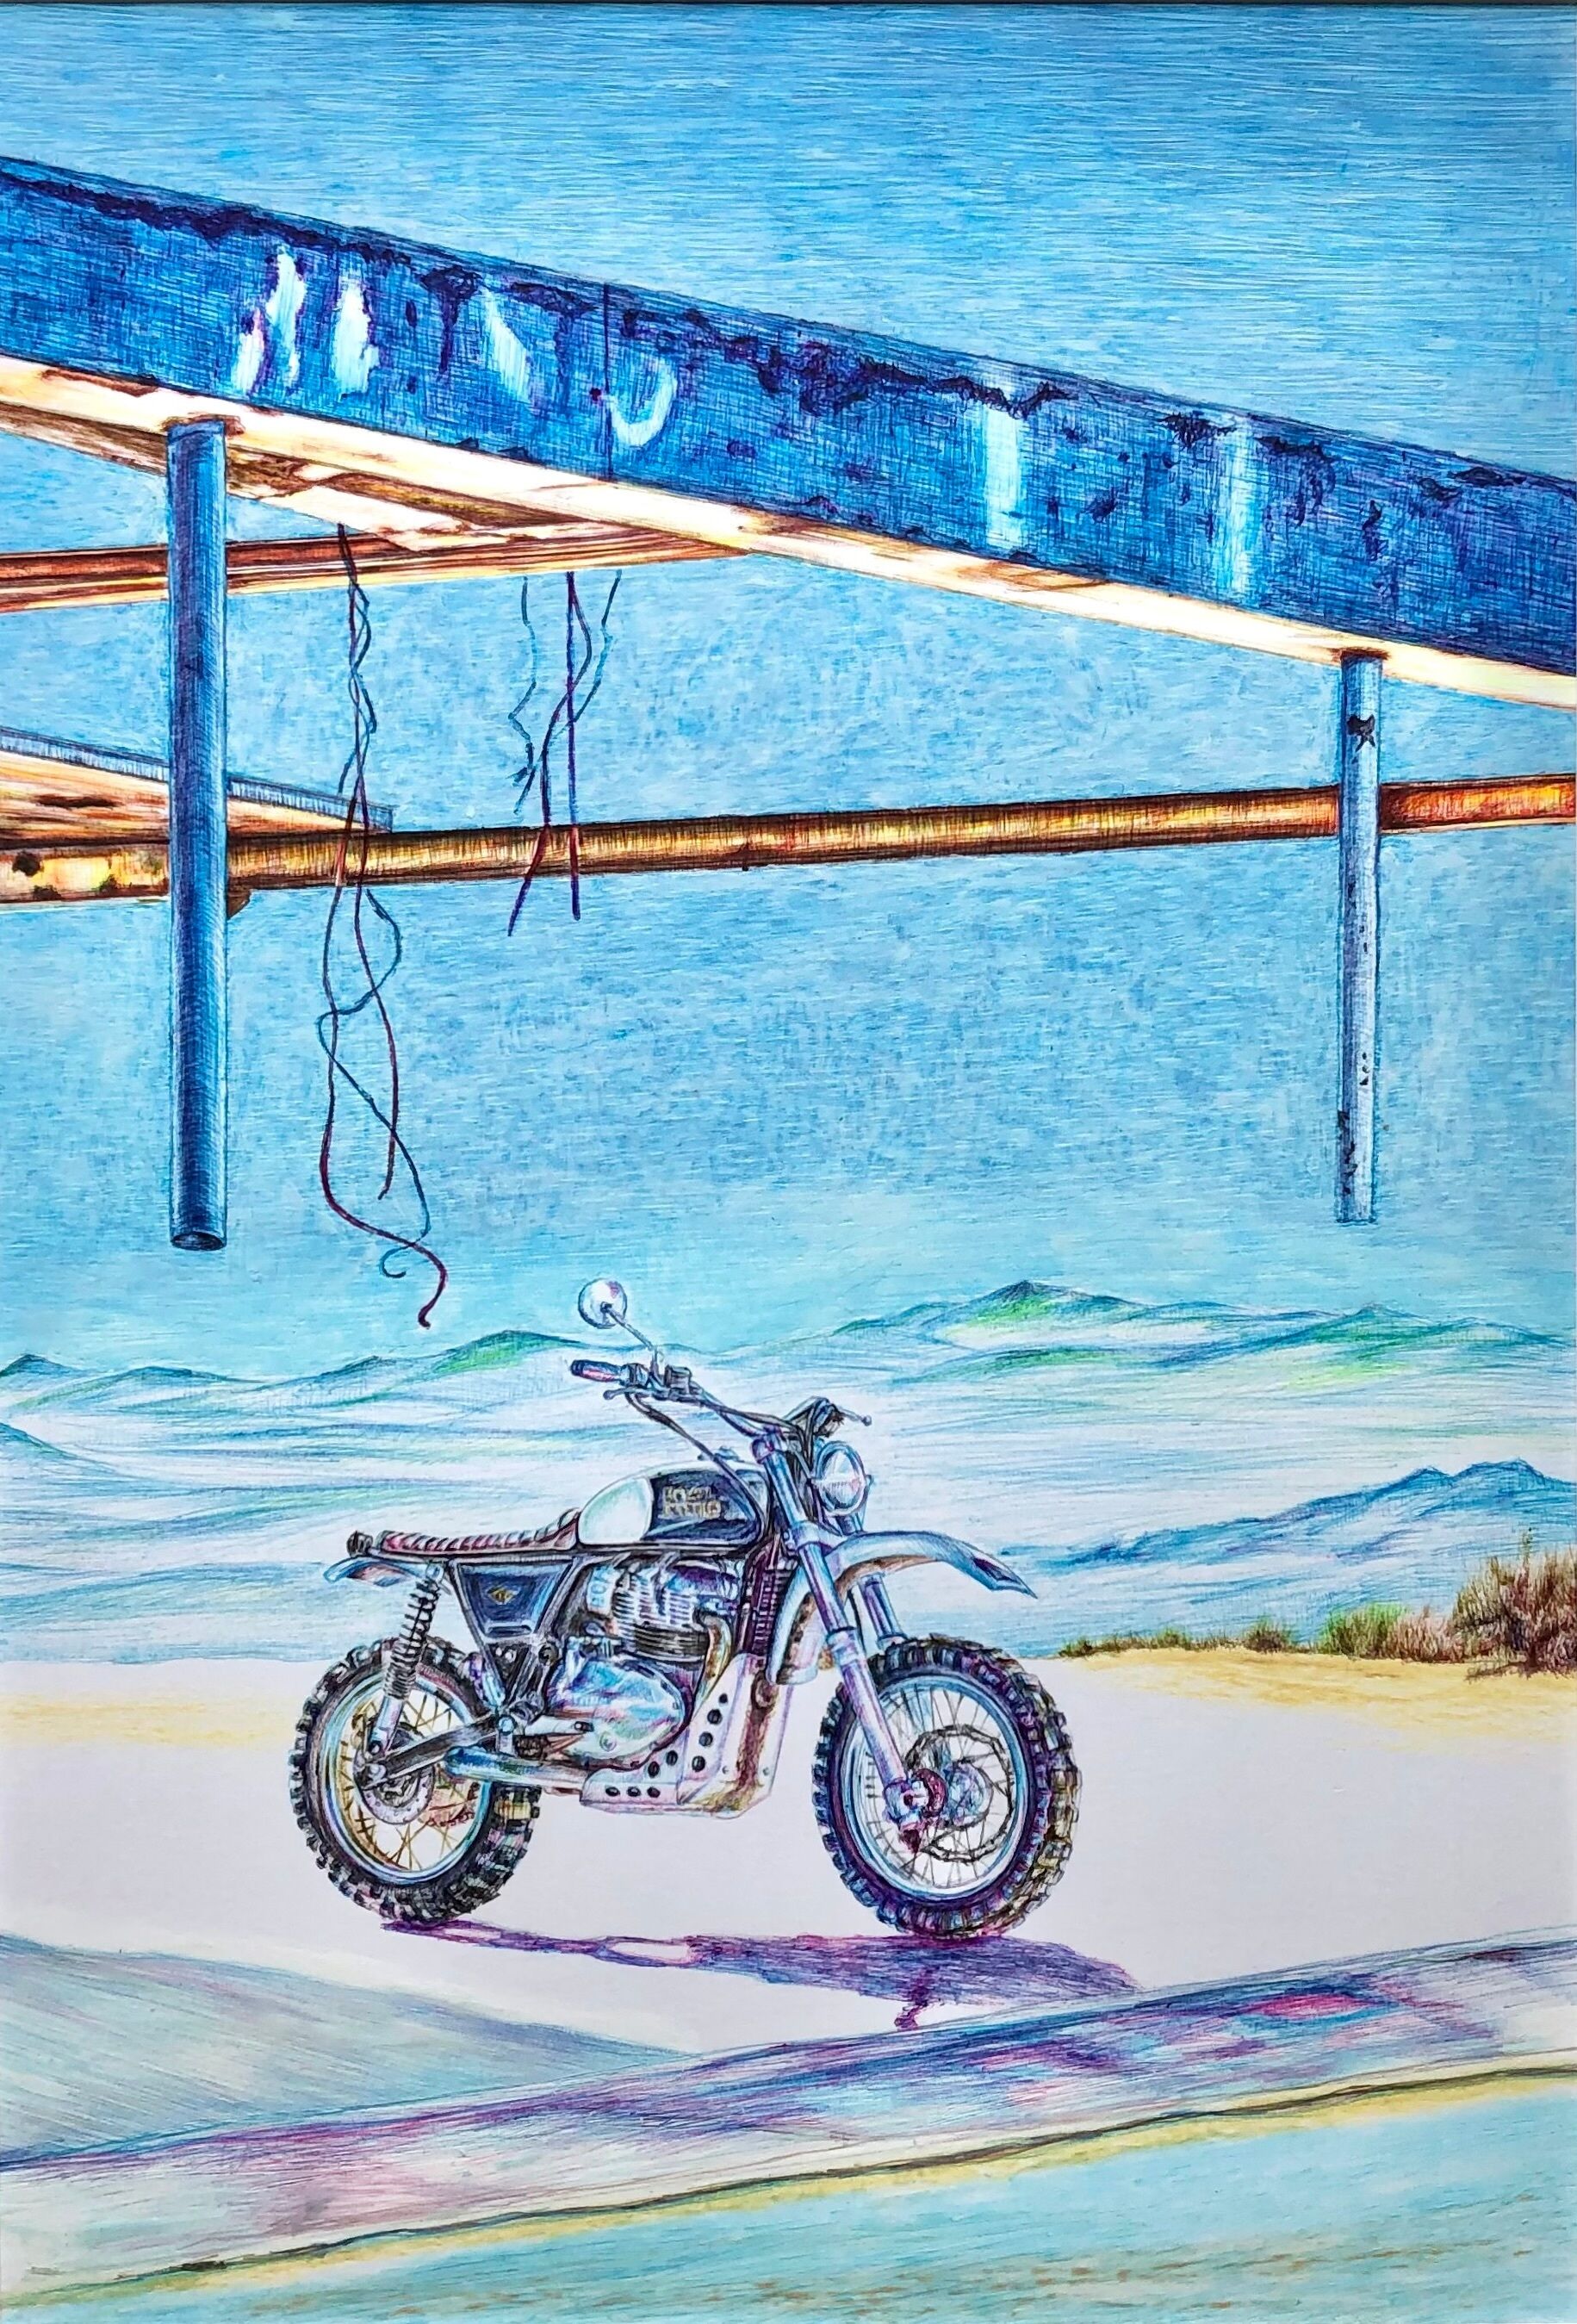 Picture "Royal Enfield motorcycle on scaffolding" (2021)